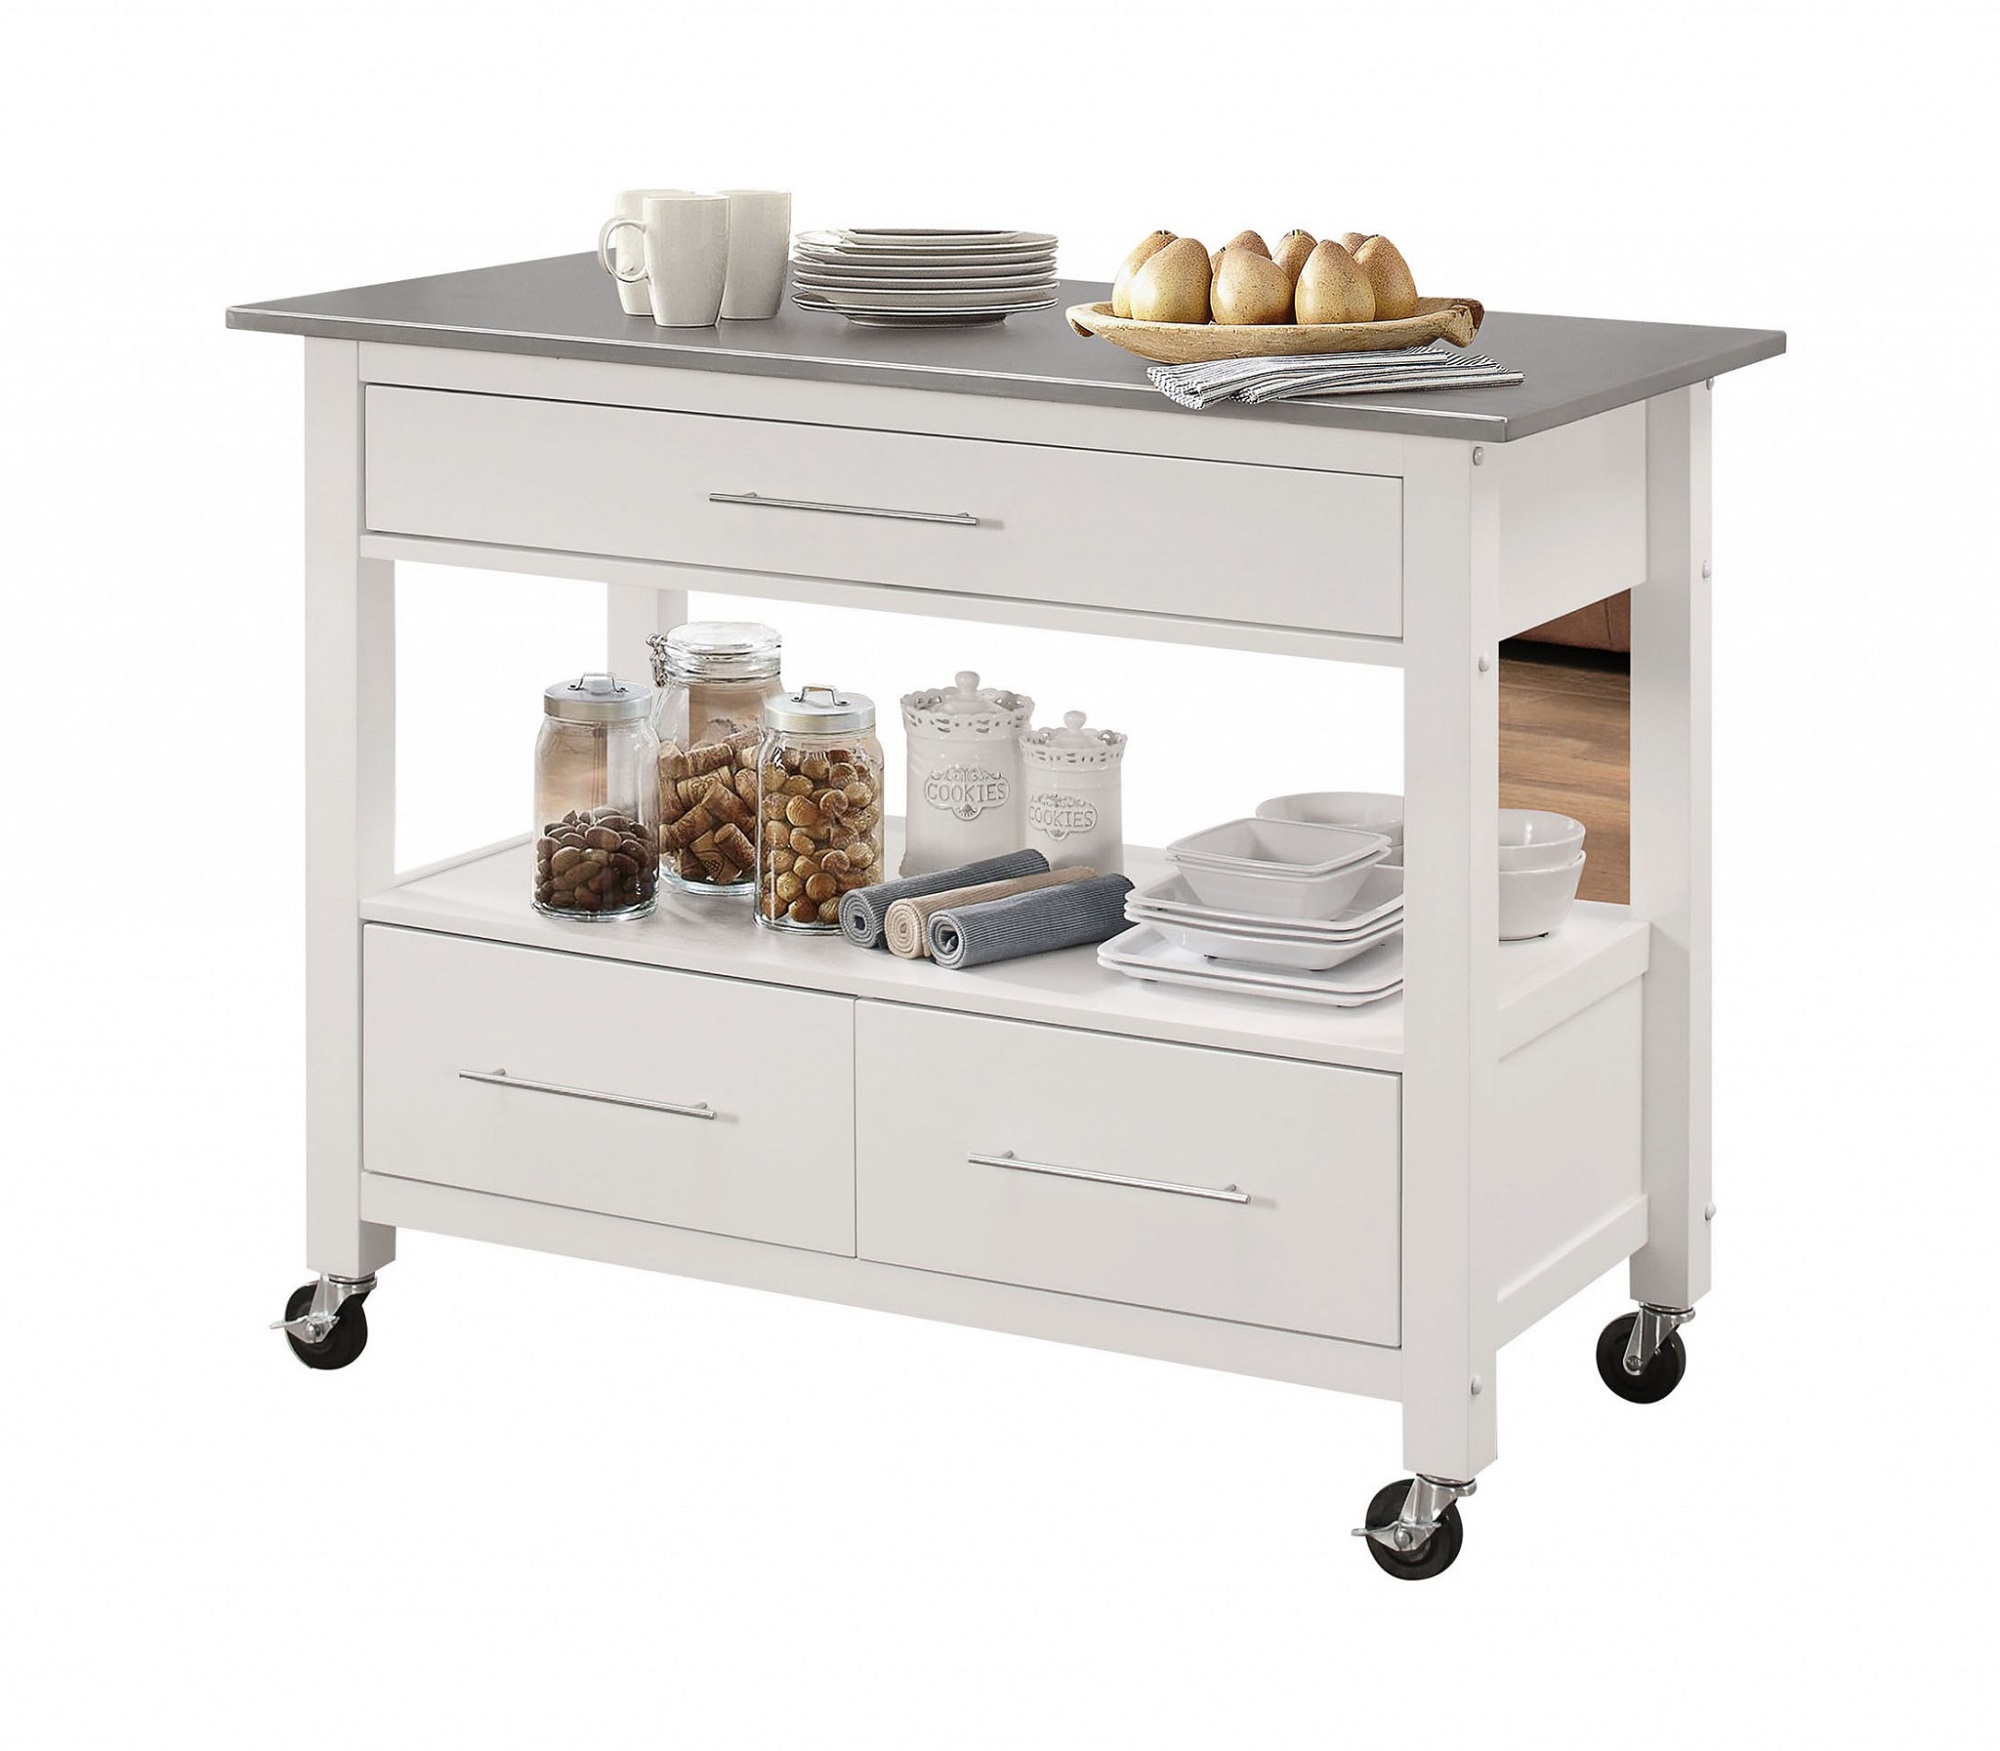 43" X 22" X 36" Stainless Steel And White Kitchen Island